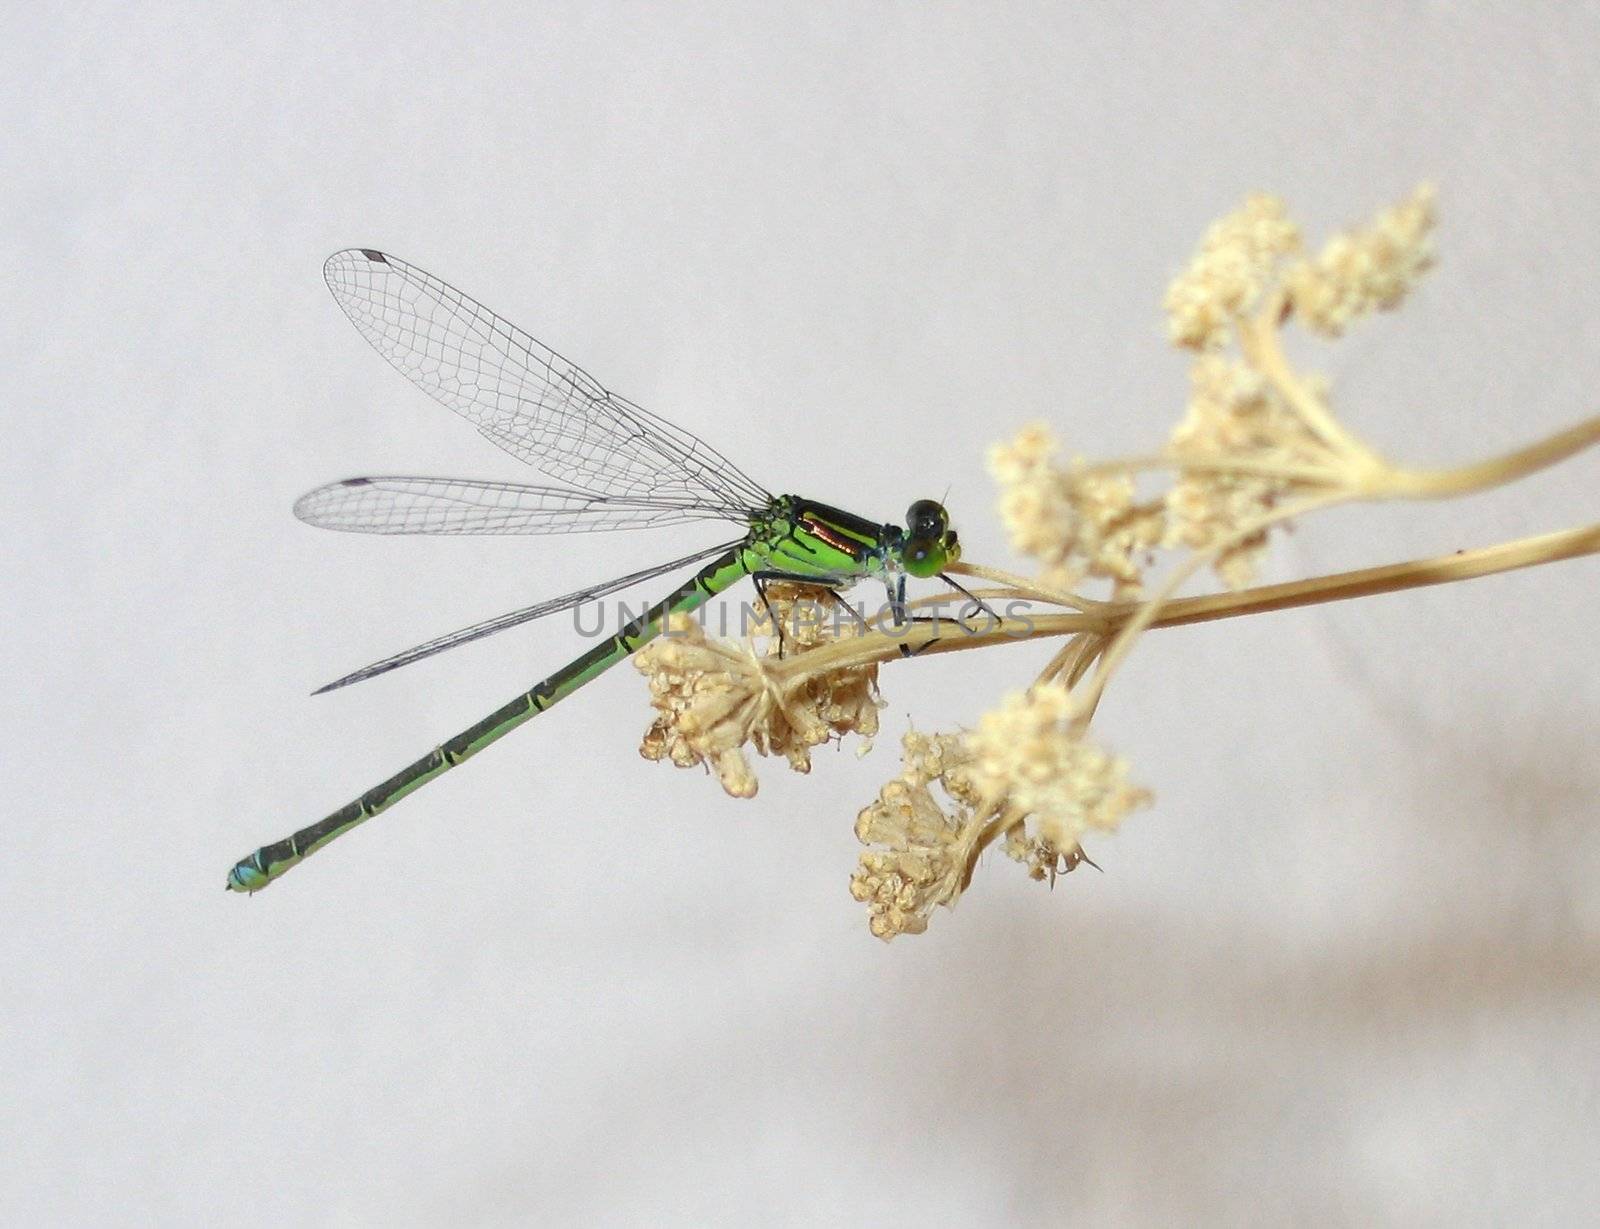 Green Dragonfly sits on dry branch